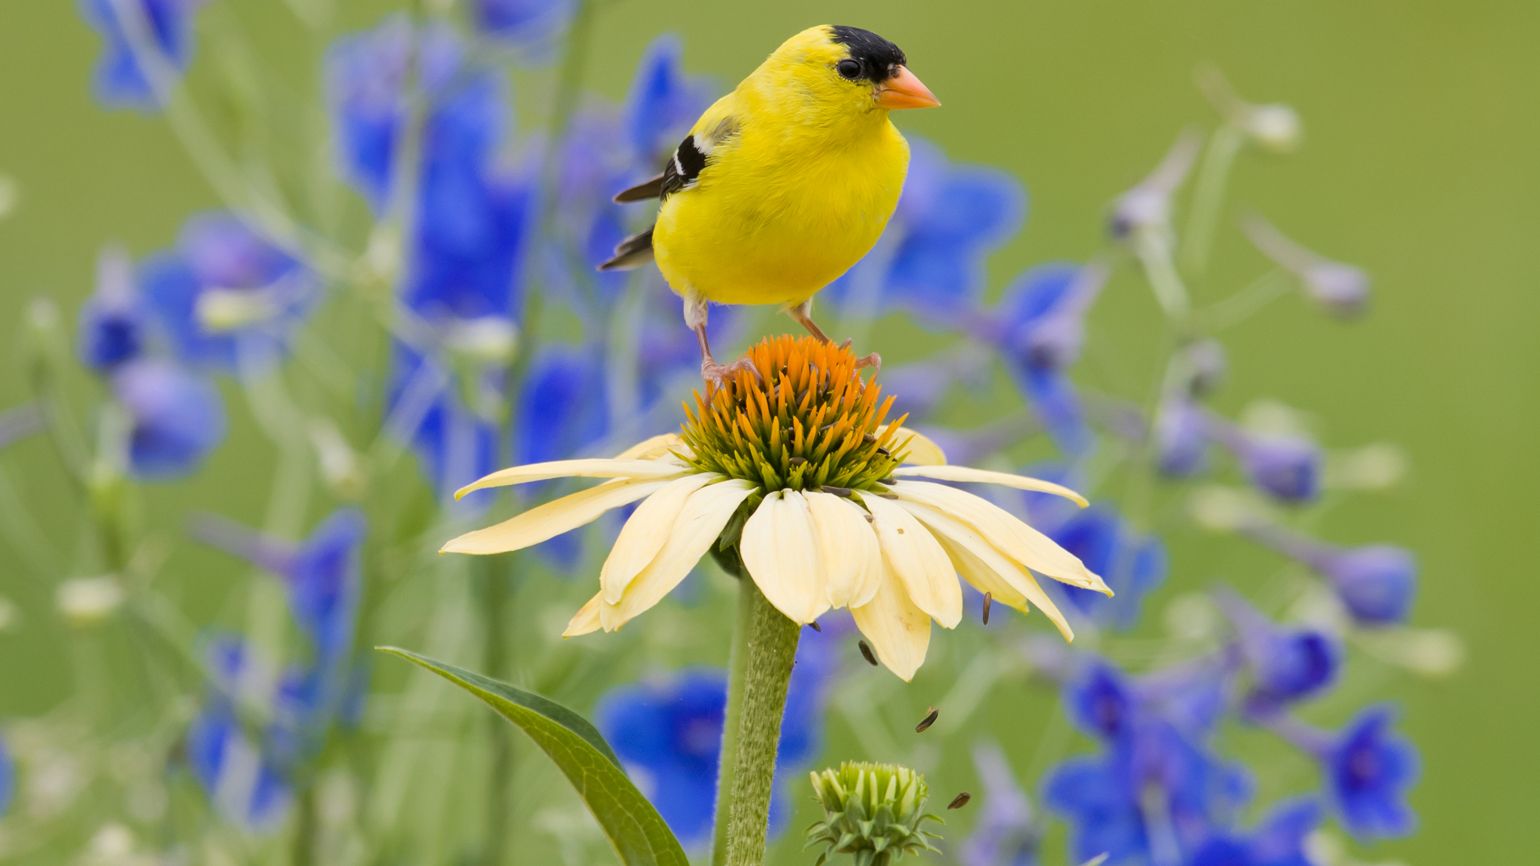 A yellow bird perched on a daisy.